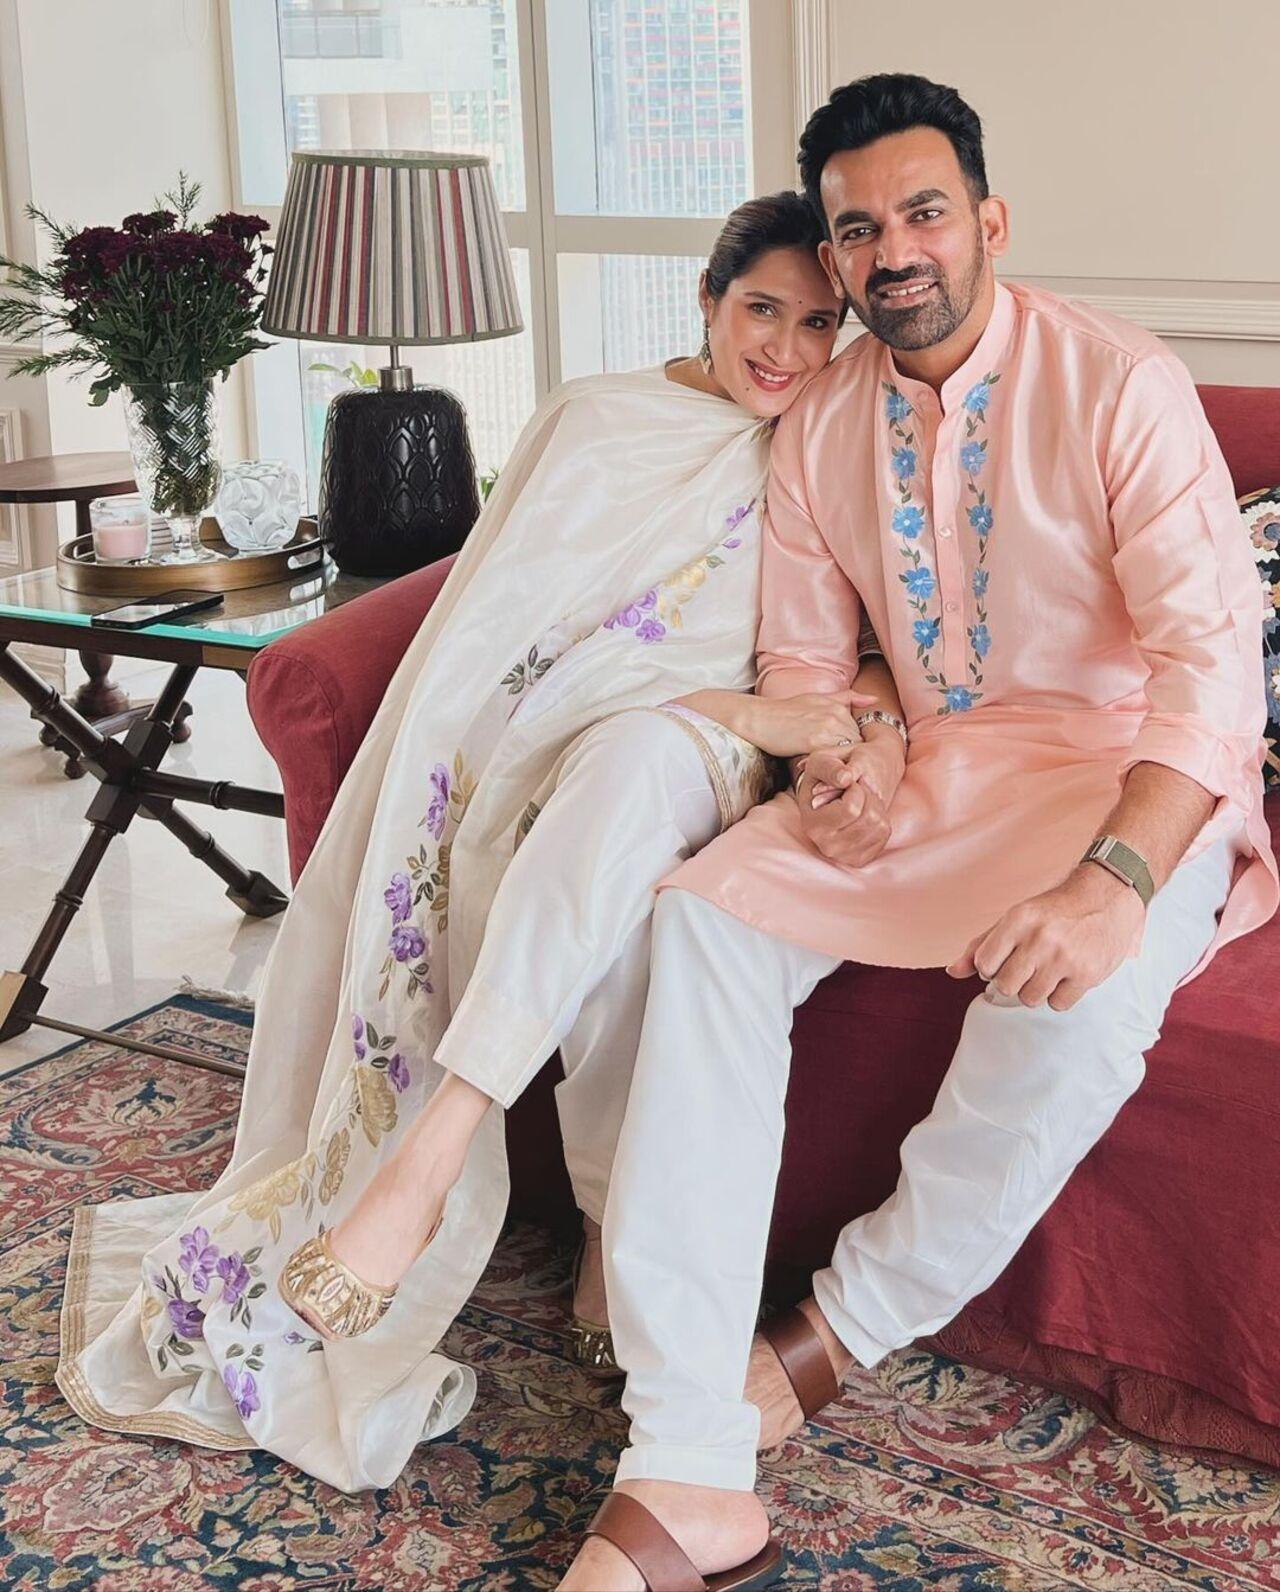 Former Indian cricketer Zaheer Khan and his actress-wife Sagarika Ghatge also celebrated Eid together